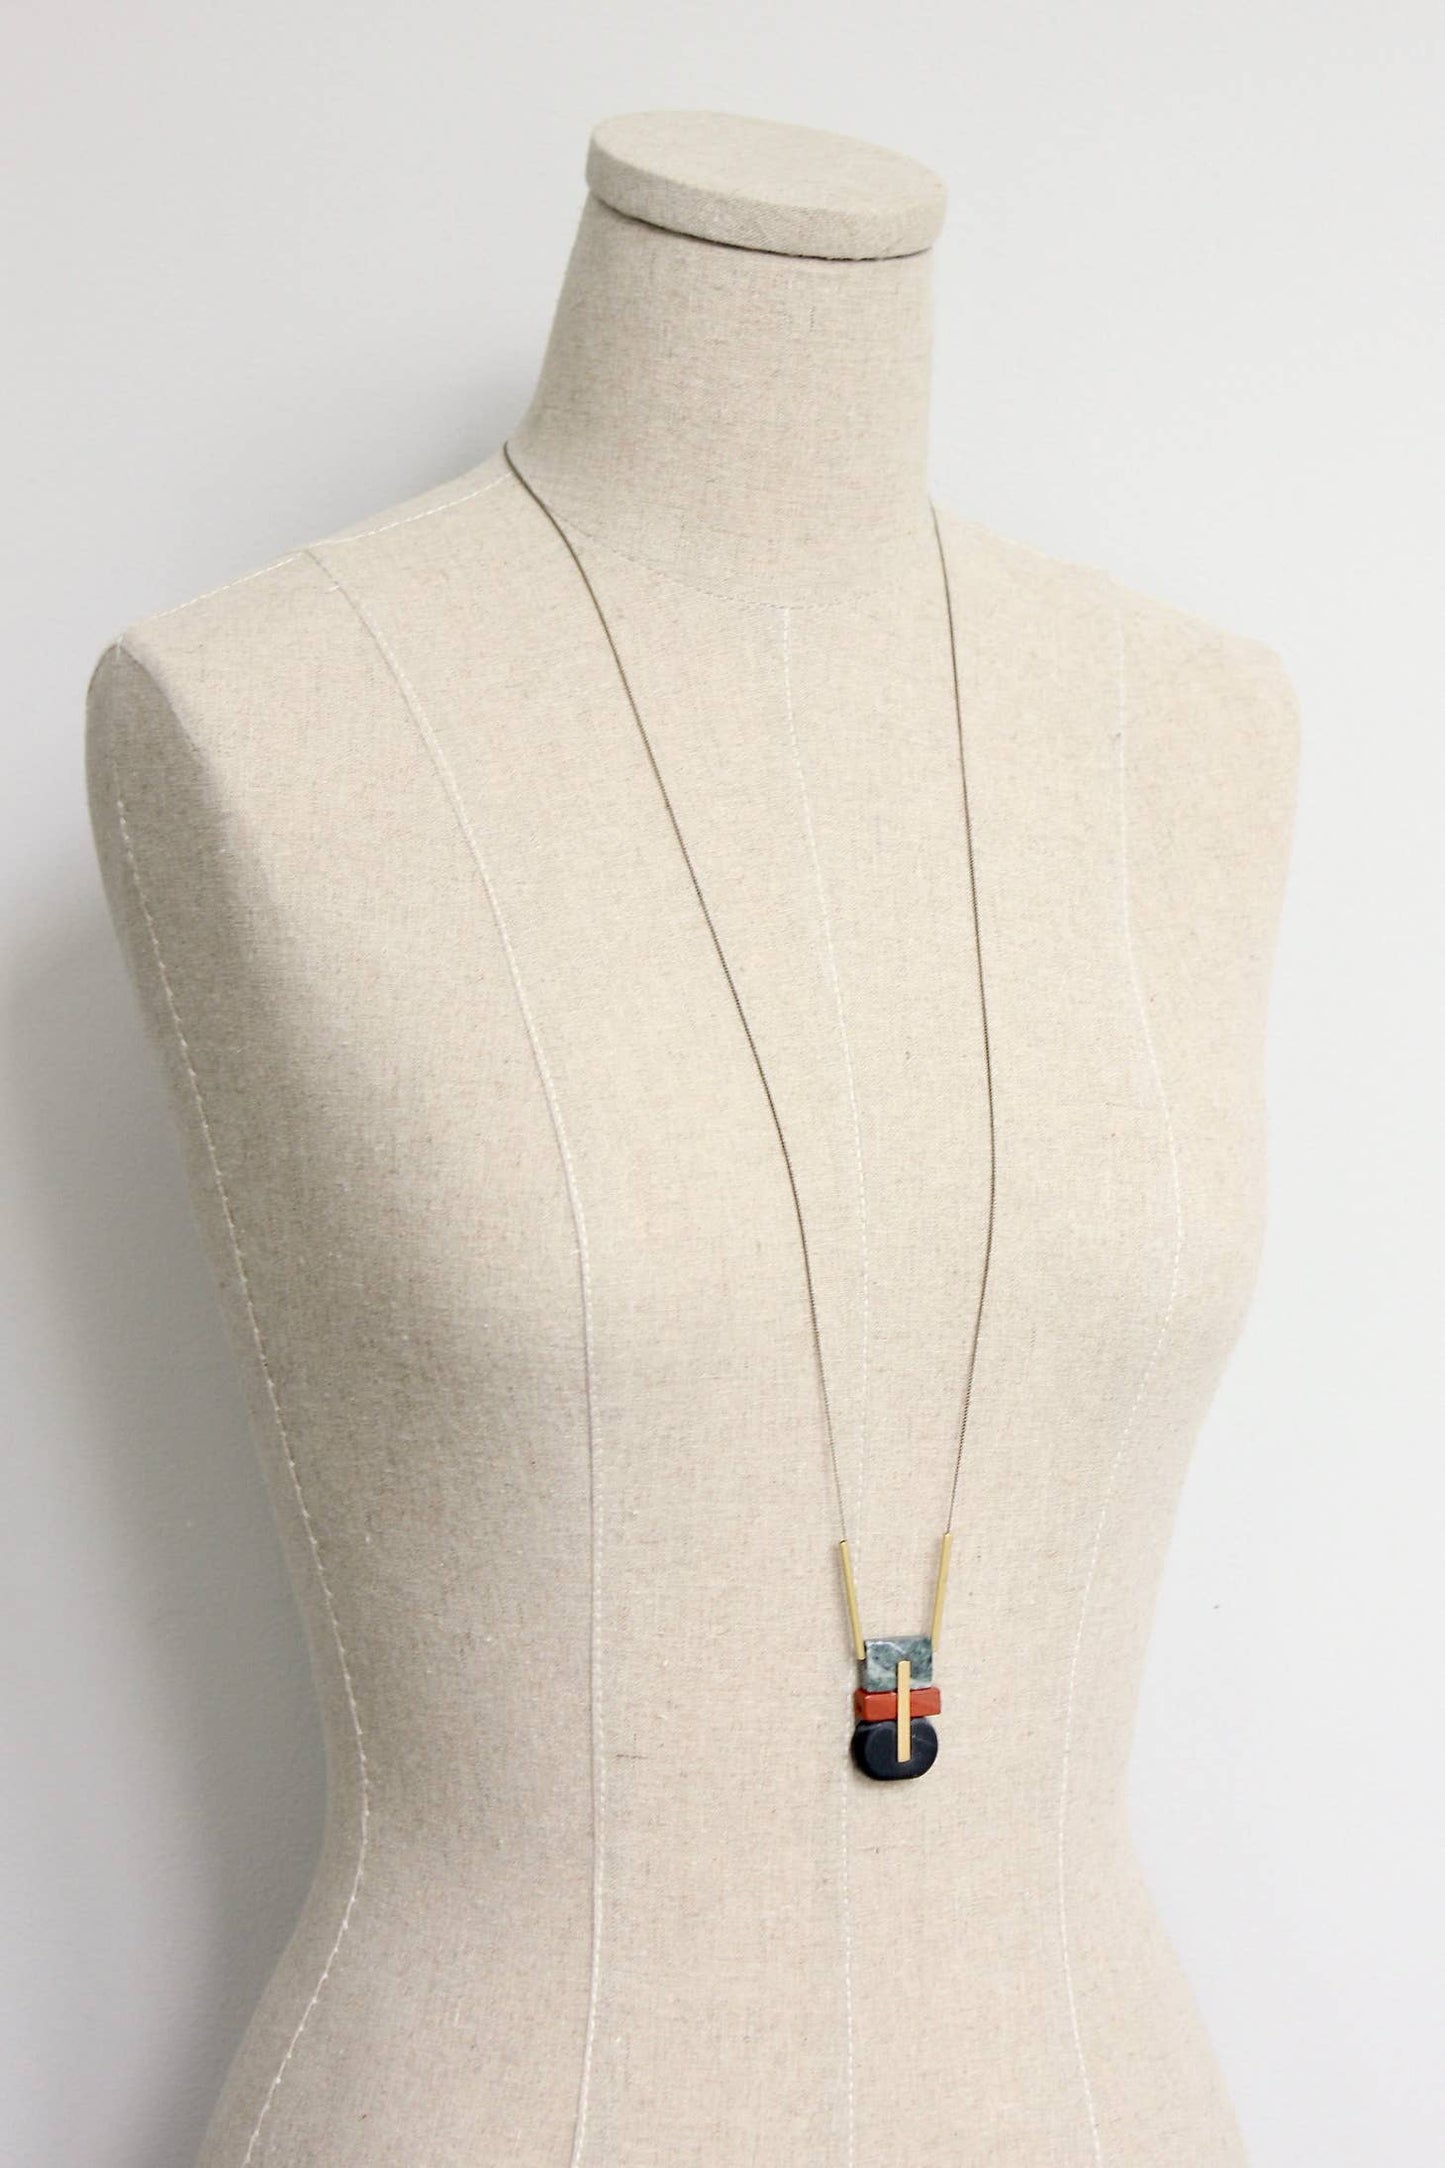 Serpentine and Agate Chain Necklace